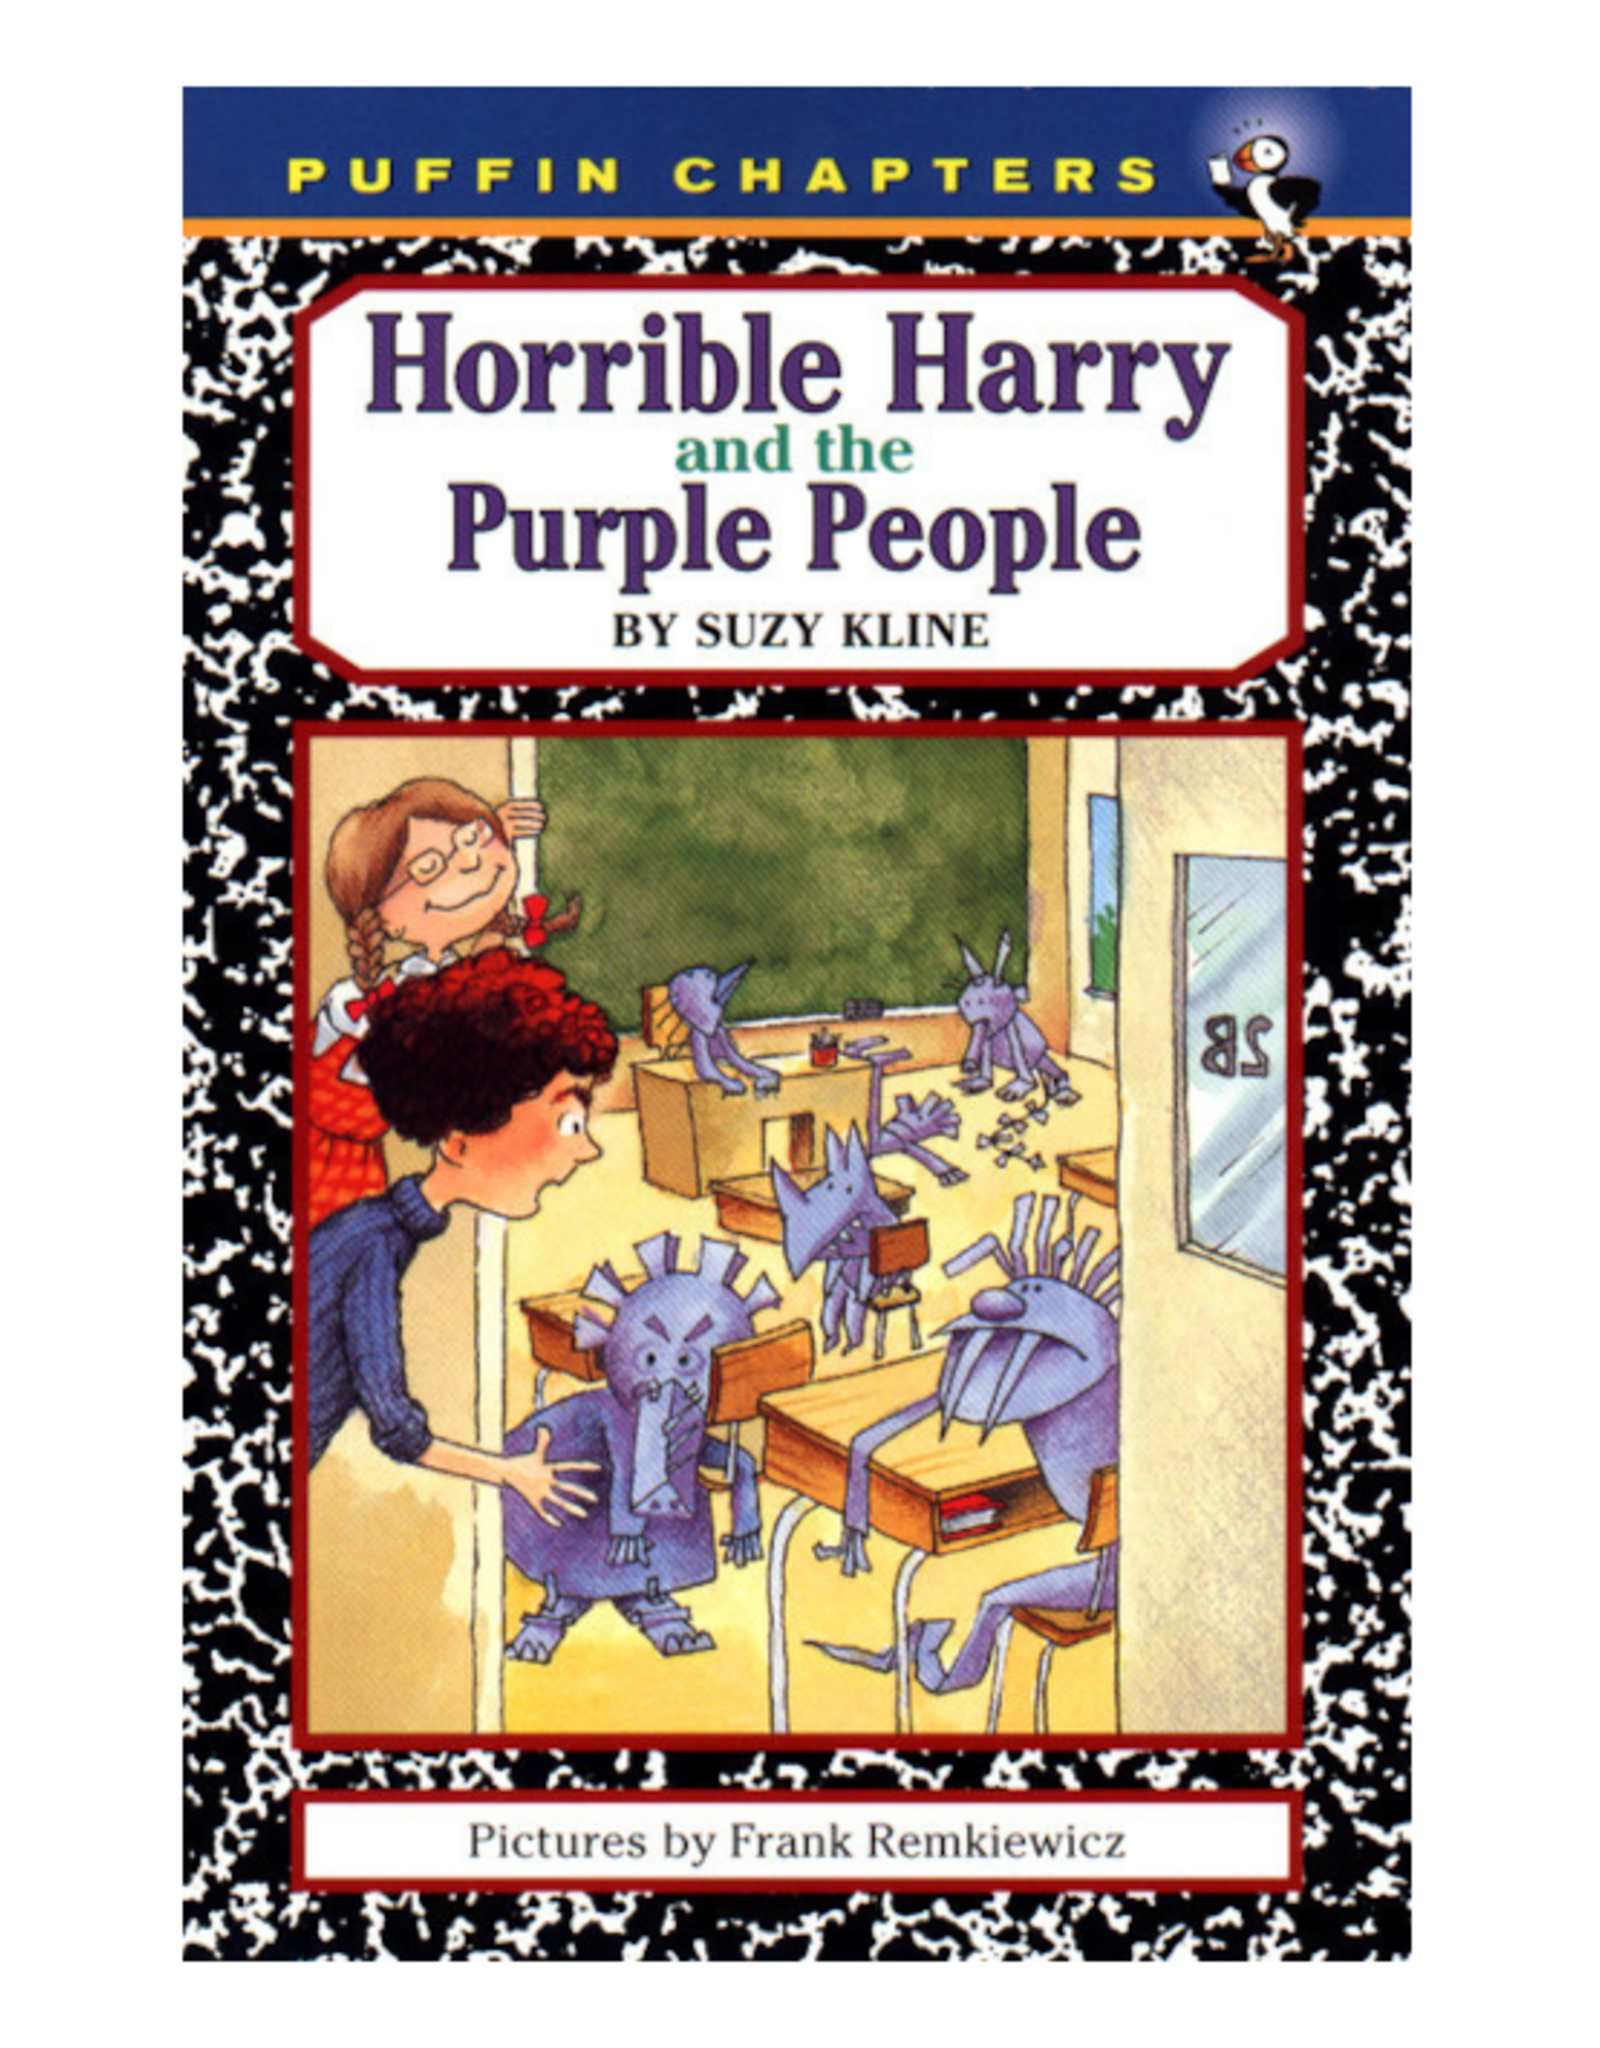 Penguin Random House Books Book - Horrible Harry and the Purple People